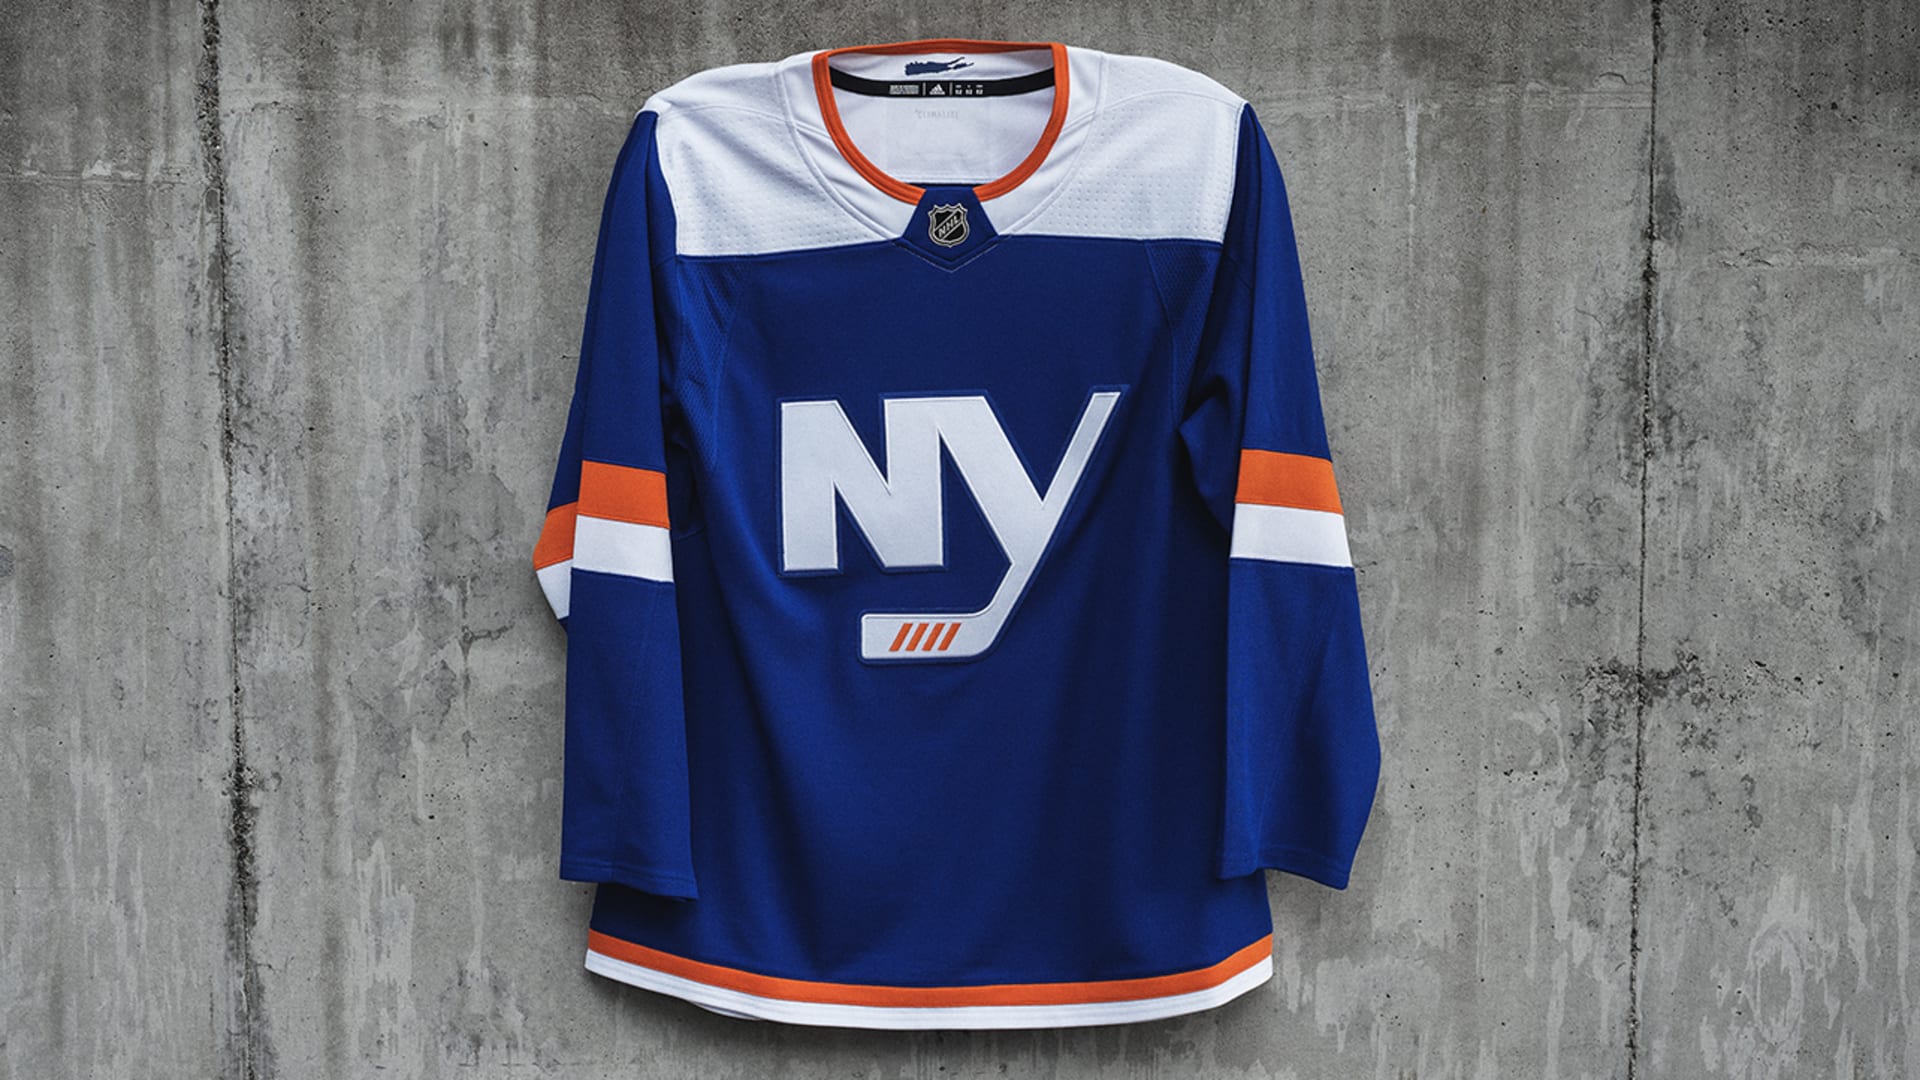 Pass or Fail: The Islanders' new third jersey, now on people